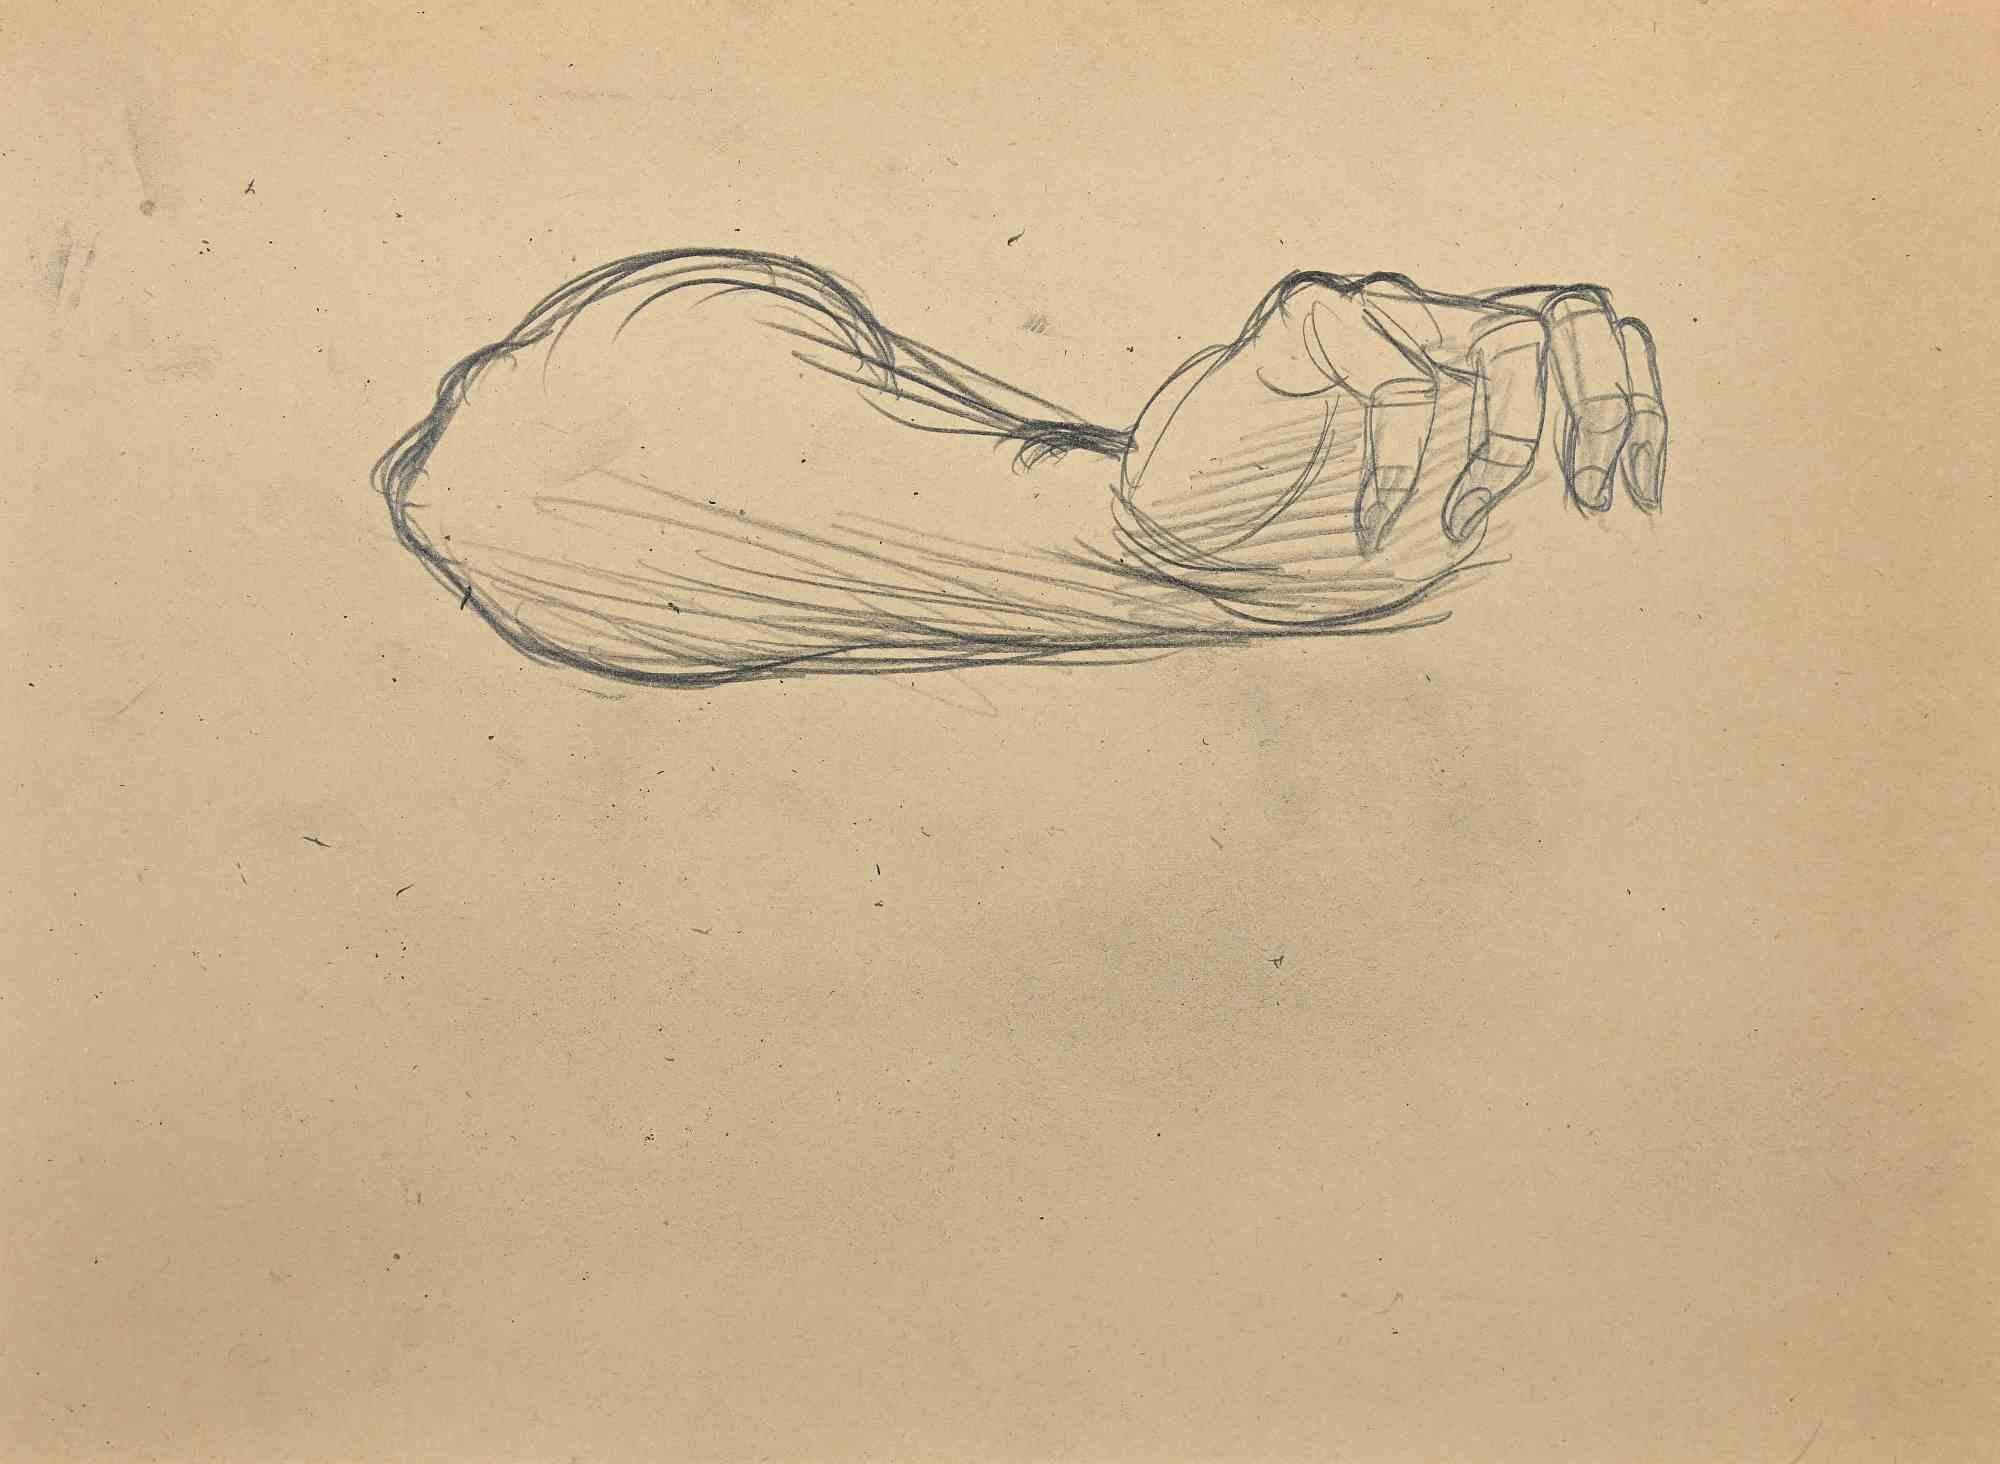 Gaspard Maillol Figurative Art - Sketch of a Hand  - Drawing - Early 20th century